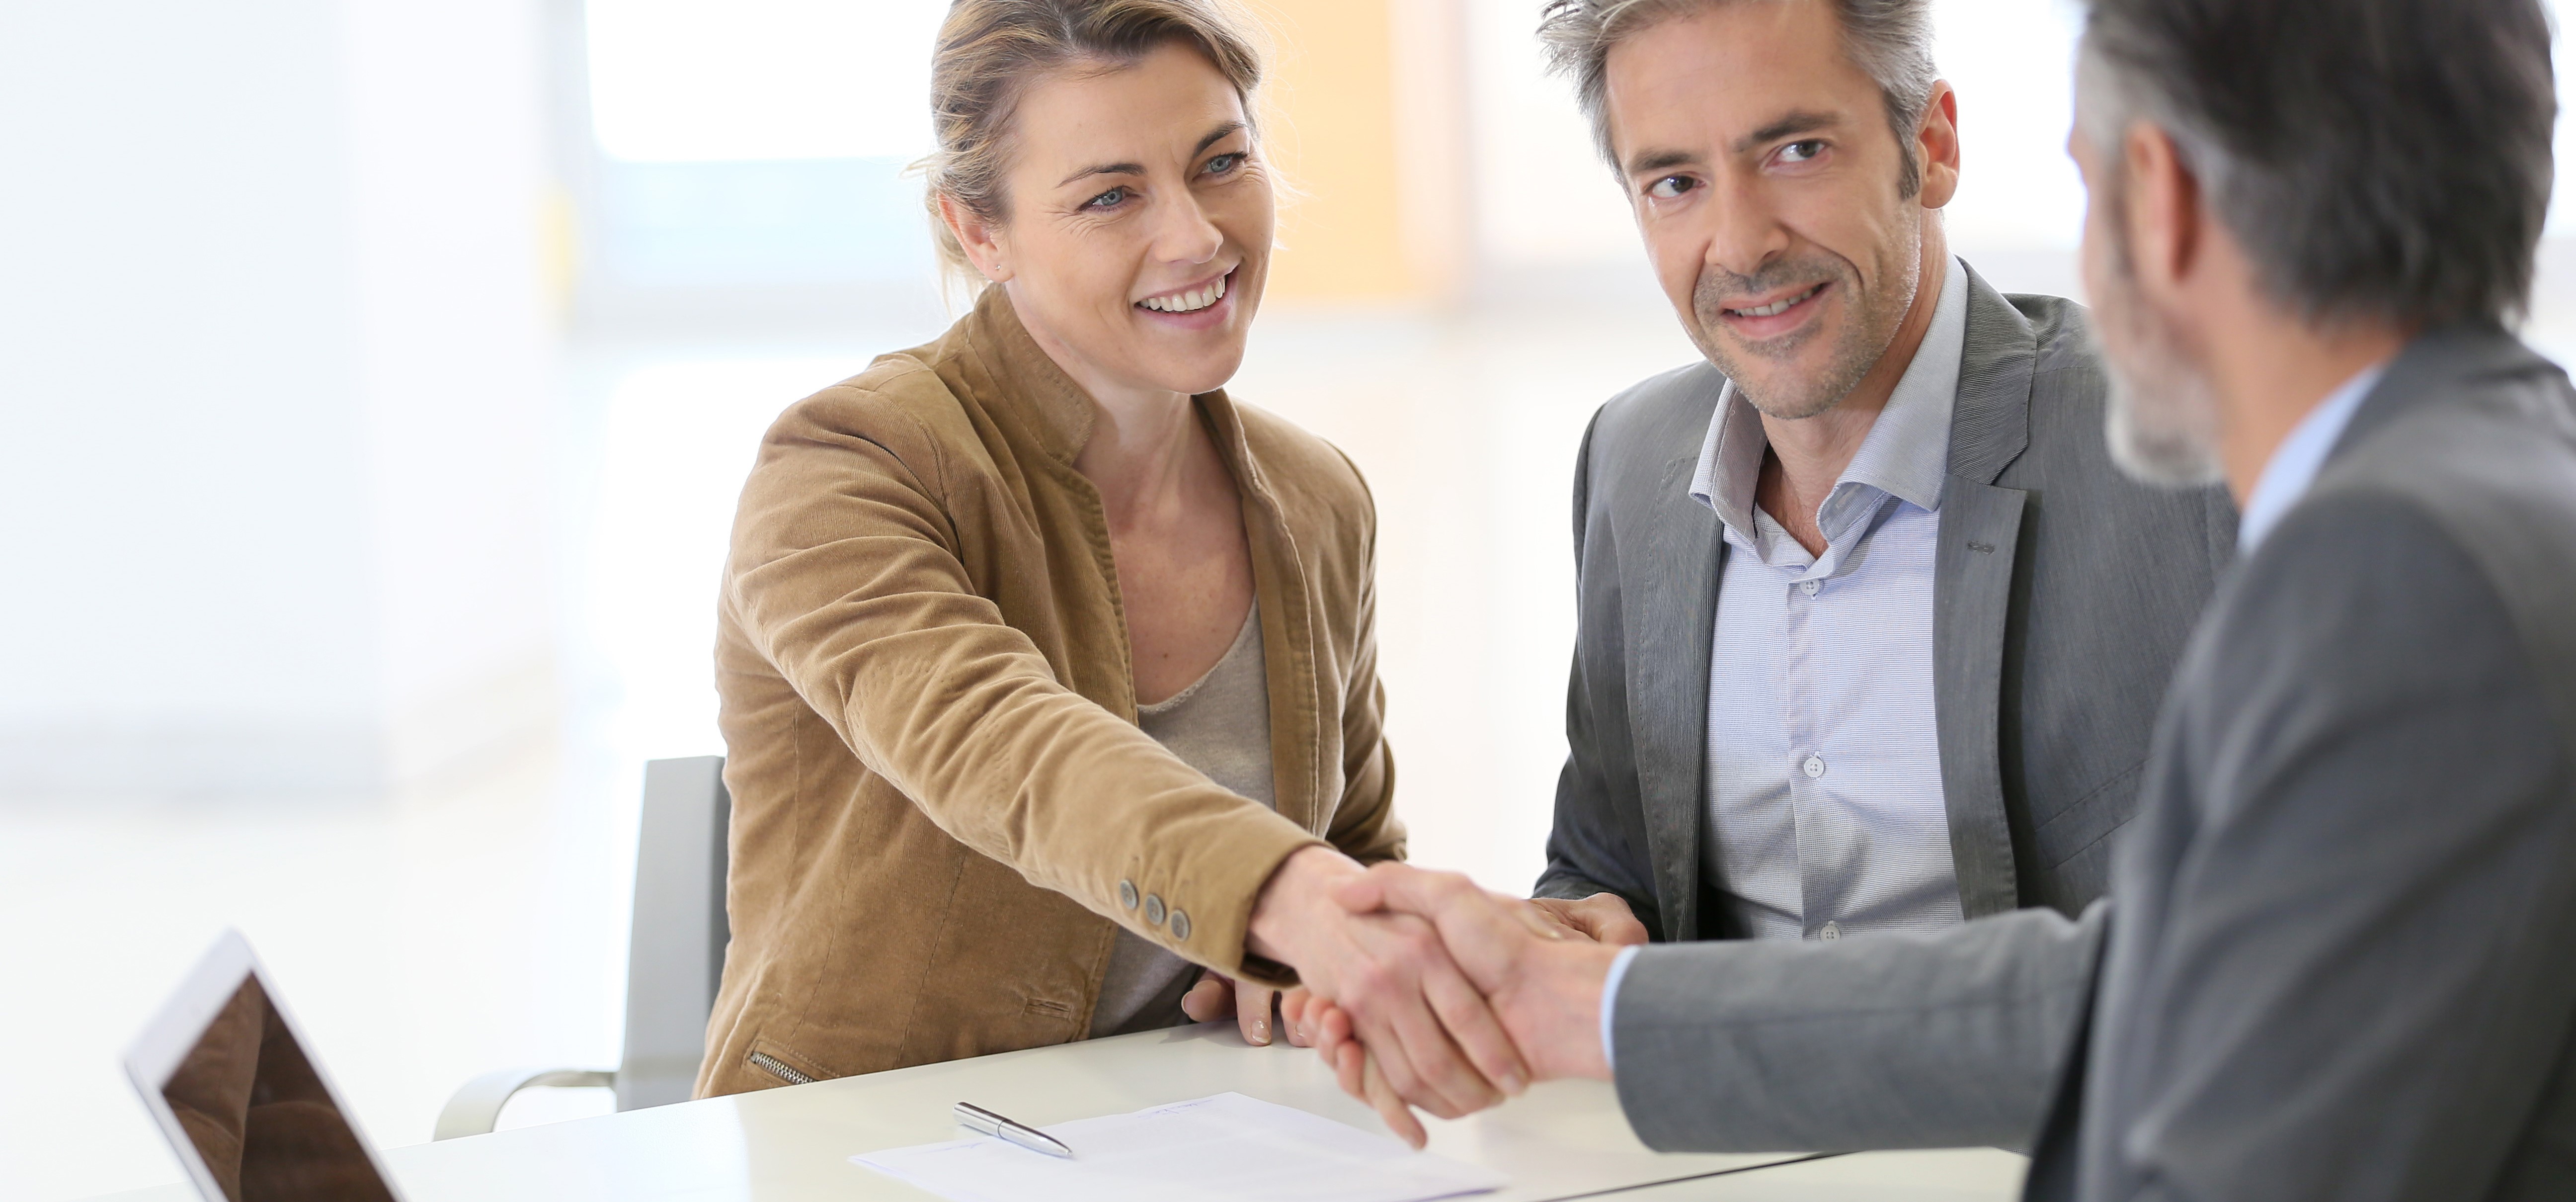 Attracting New Clients - Several Strategies For Loan Officers